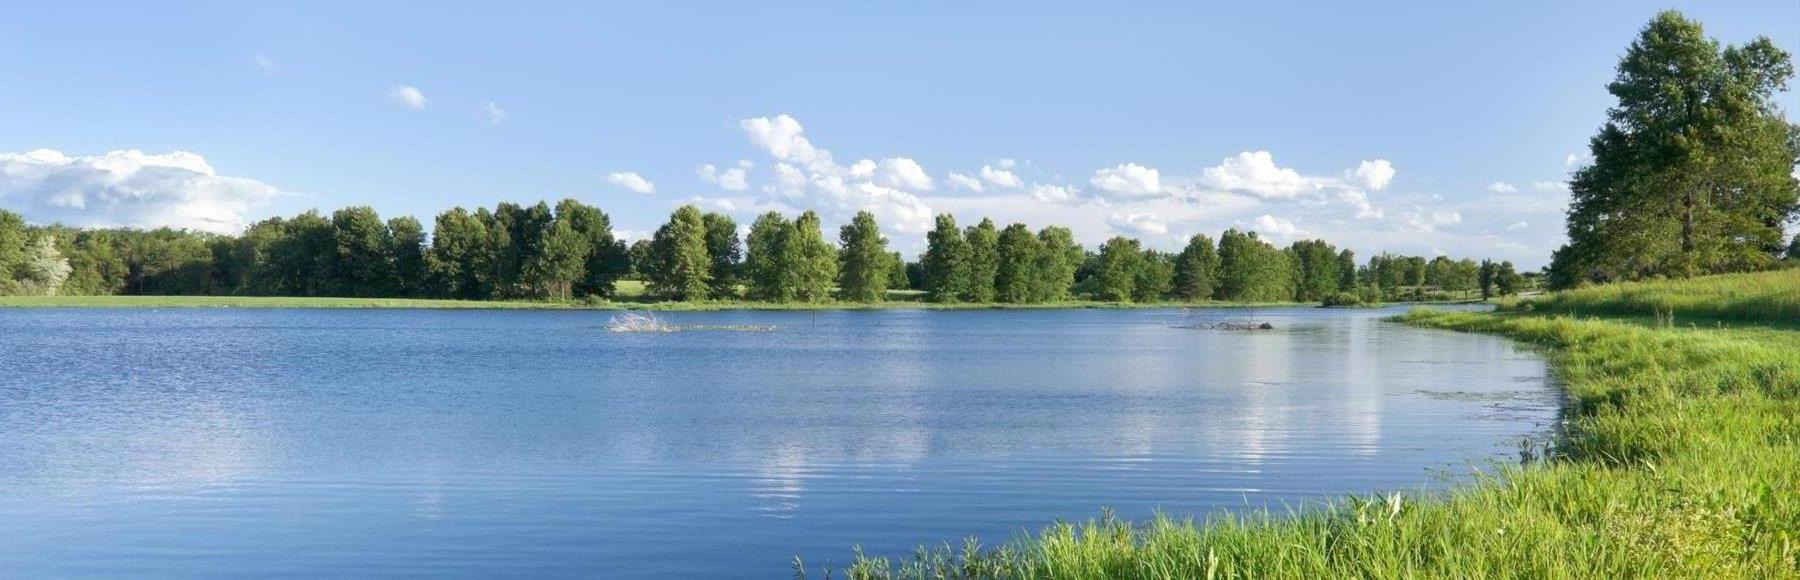 Landscape scene of a lake surrounded by trees